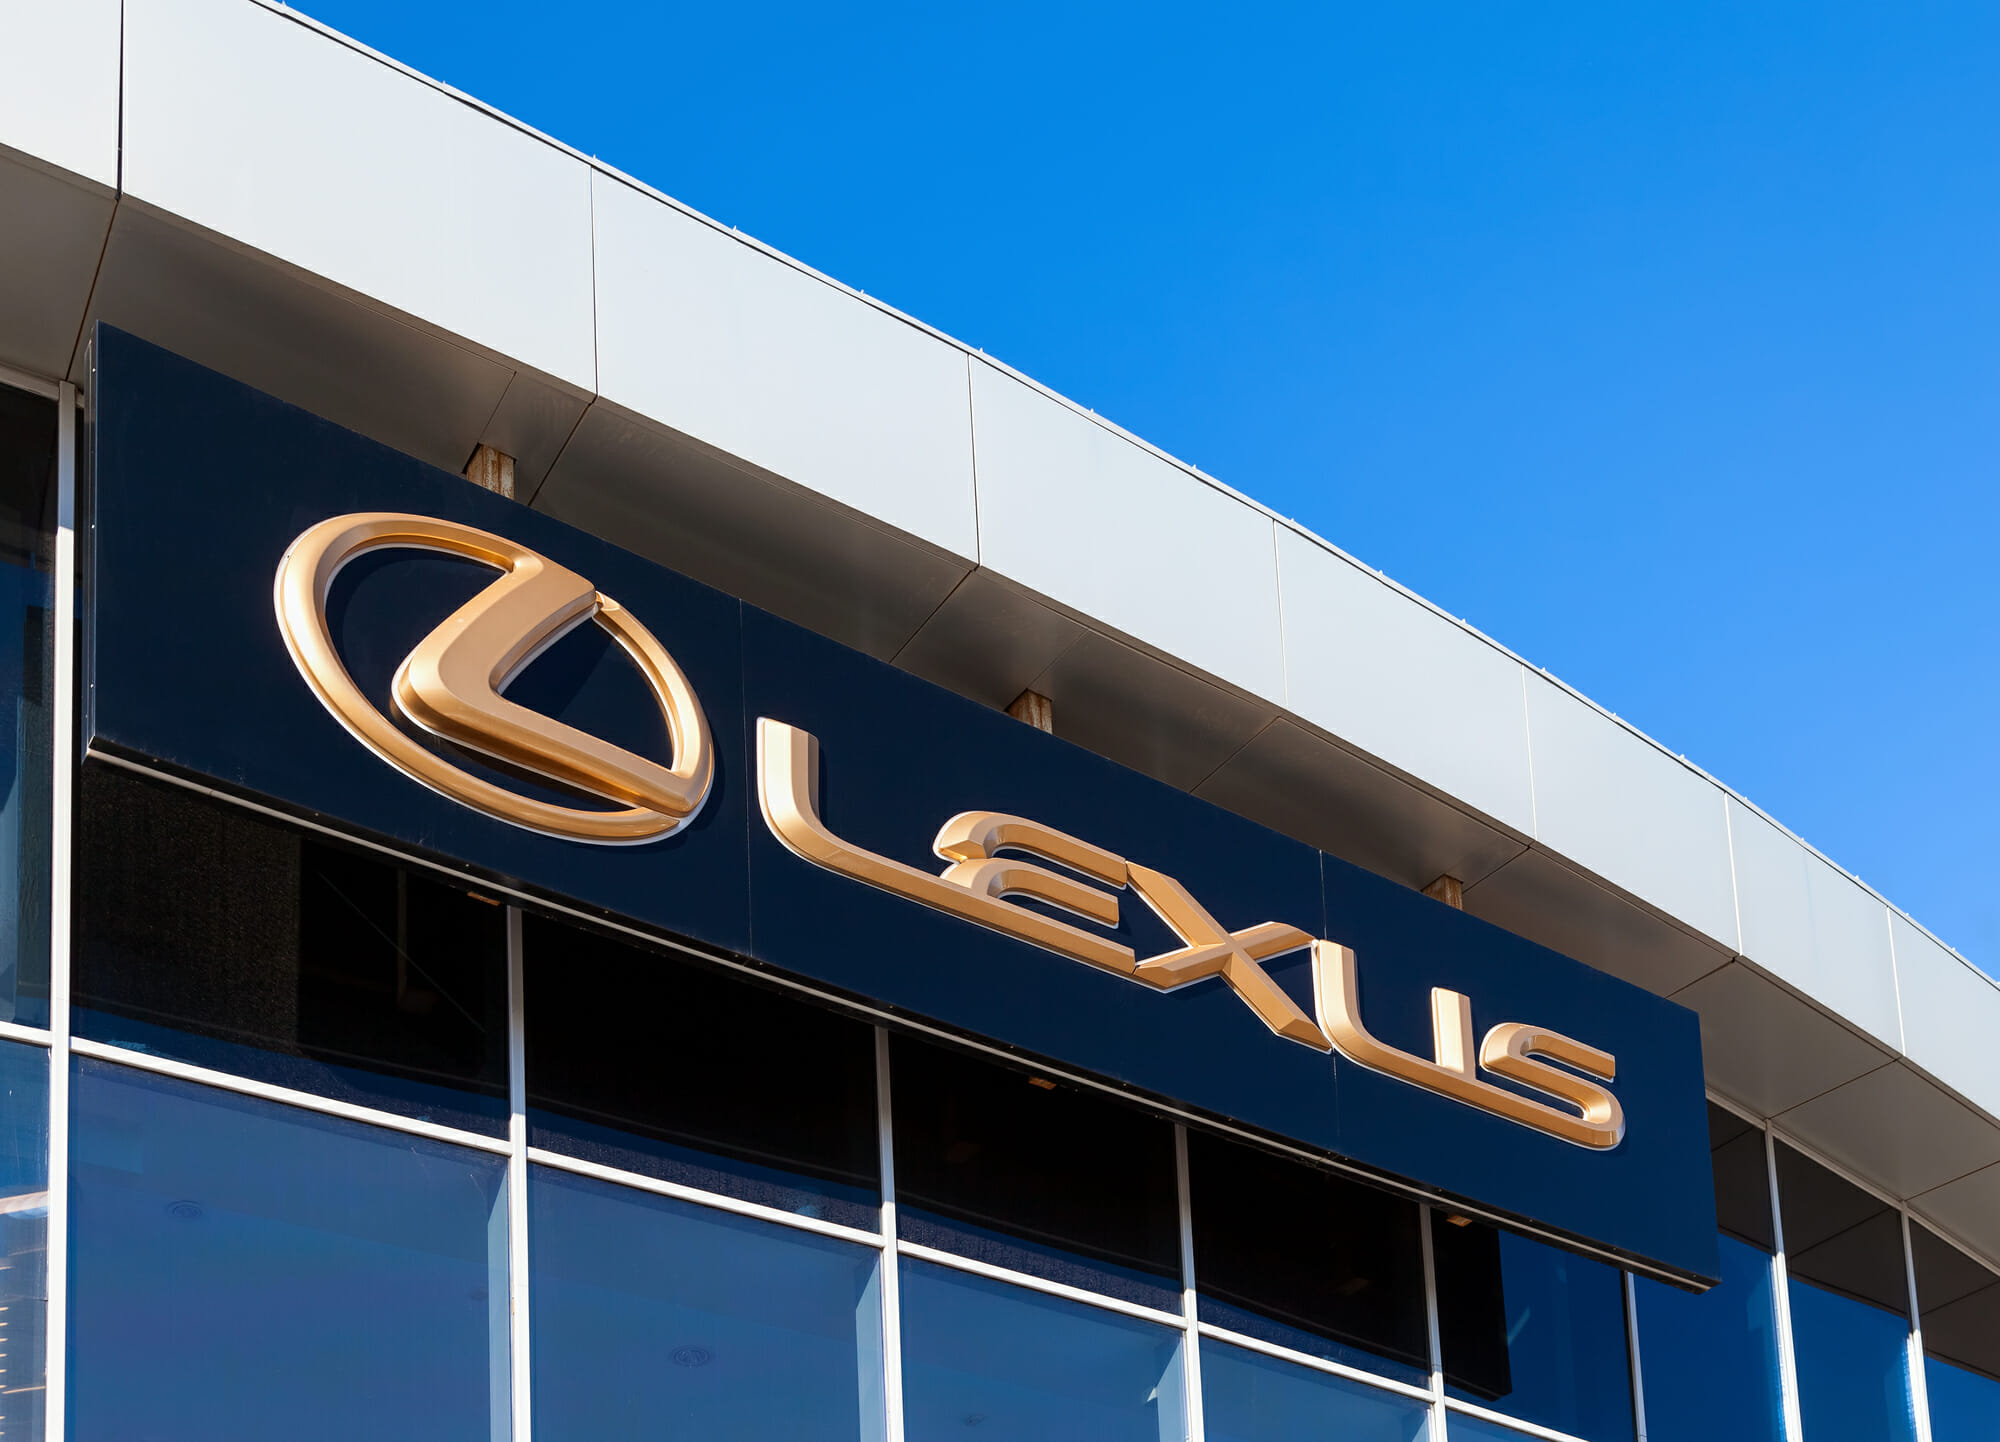 Lexus SUV Models To Add To Your Shopping List